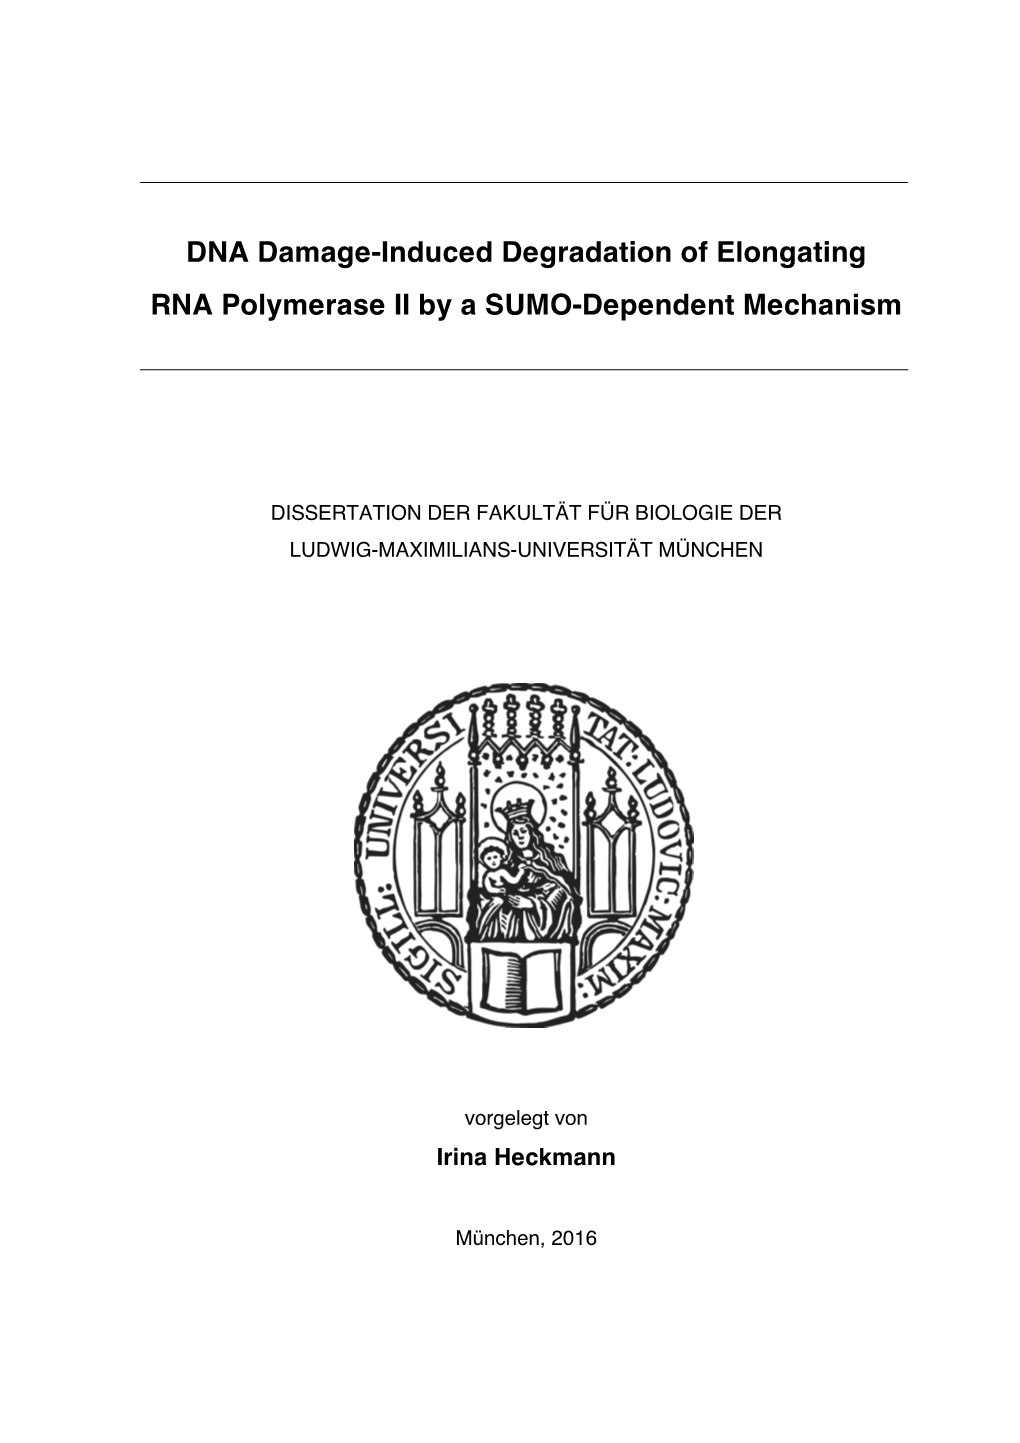 DNA Damage-Induced Degradation of Elongating RNA Polymerase II by A